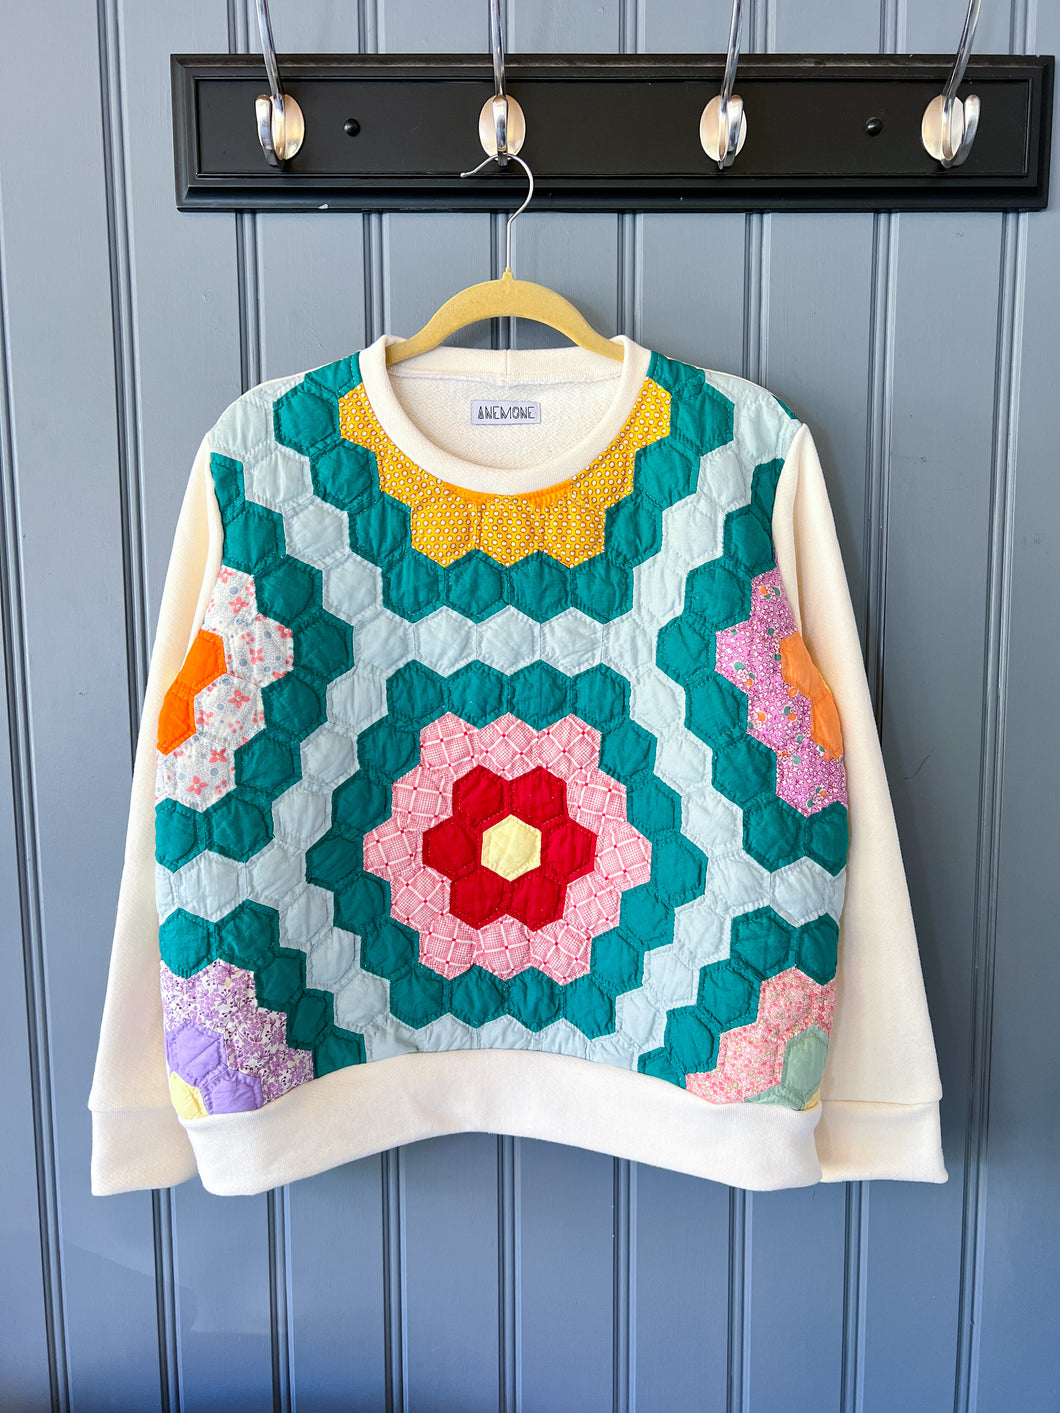 One-of-a-Kind: Grandmother's Flower Garden French Terry Pullover (XL)